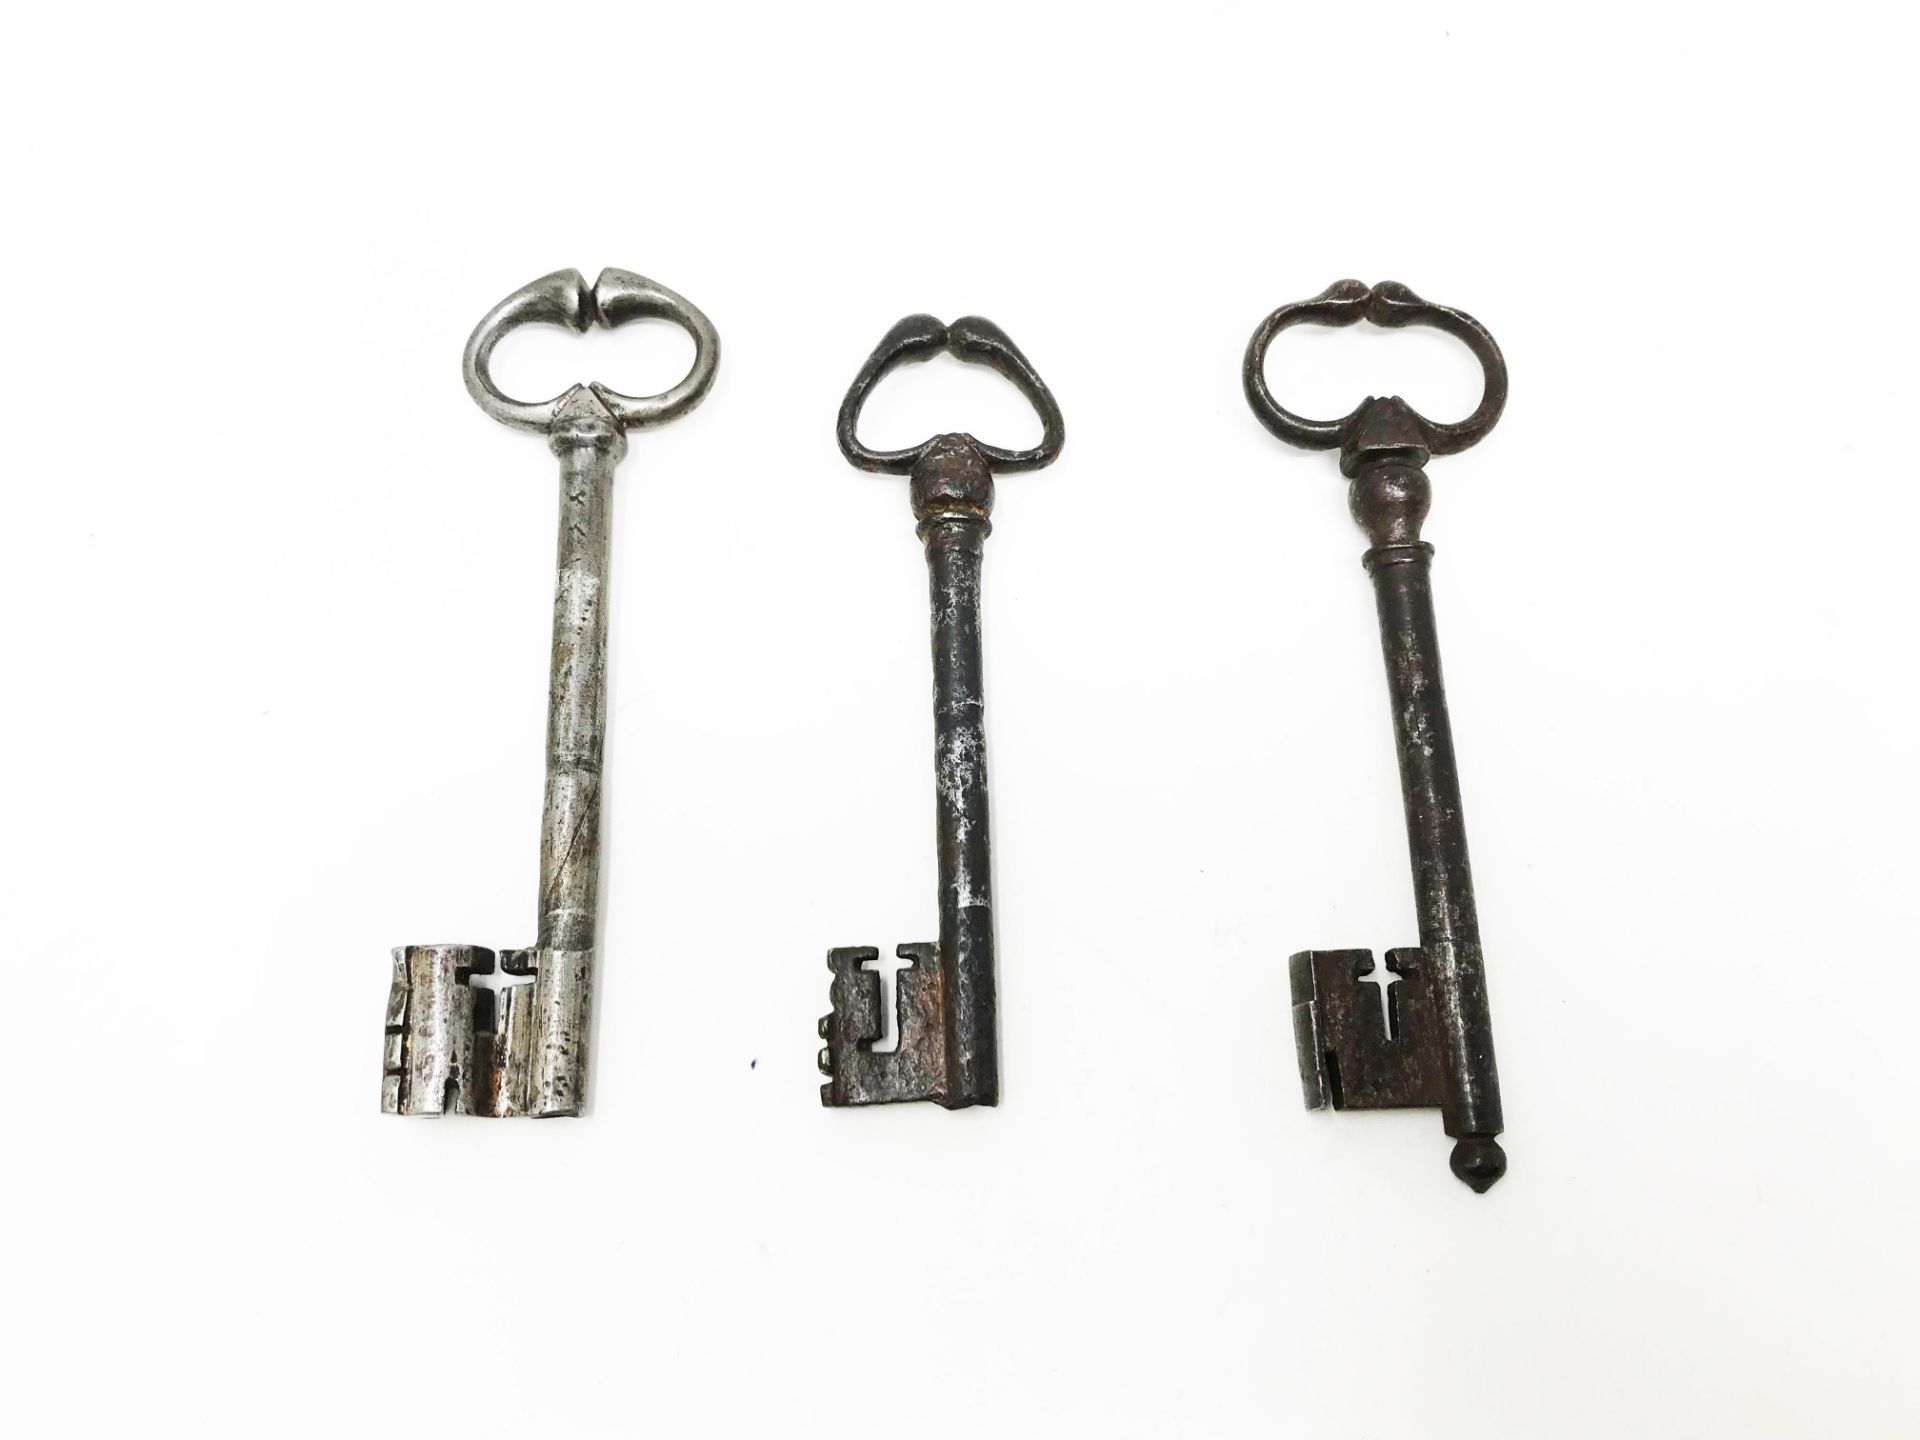 Three keys with frog's legs rings12, 49 - 11, 51 - 12, 97 cm Part of the chapter "From Enlightenment